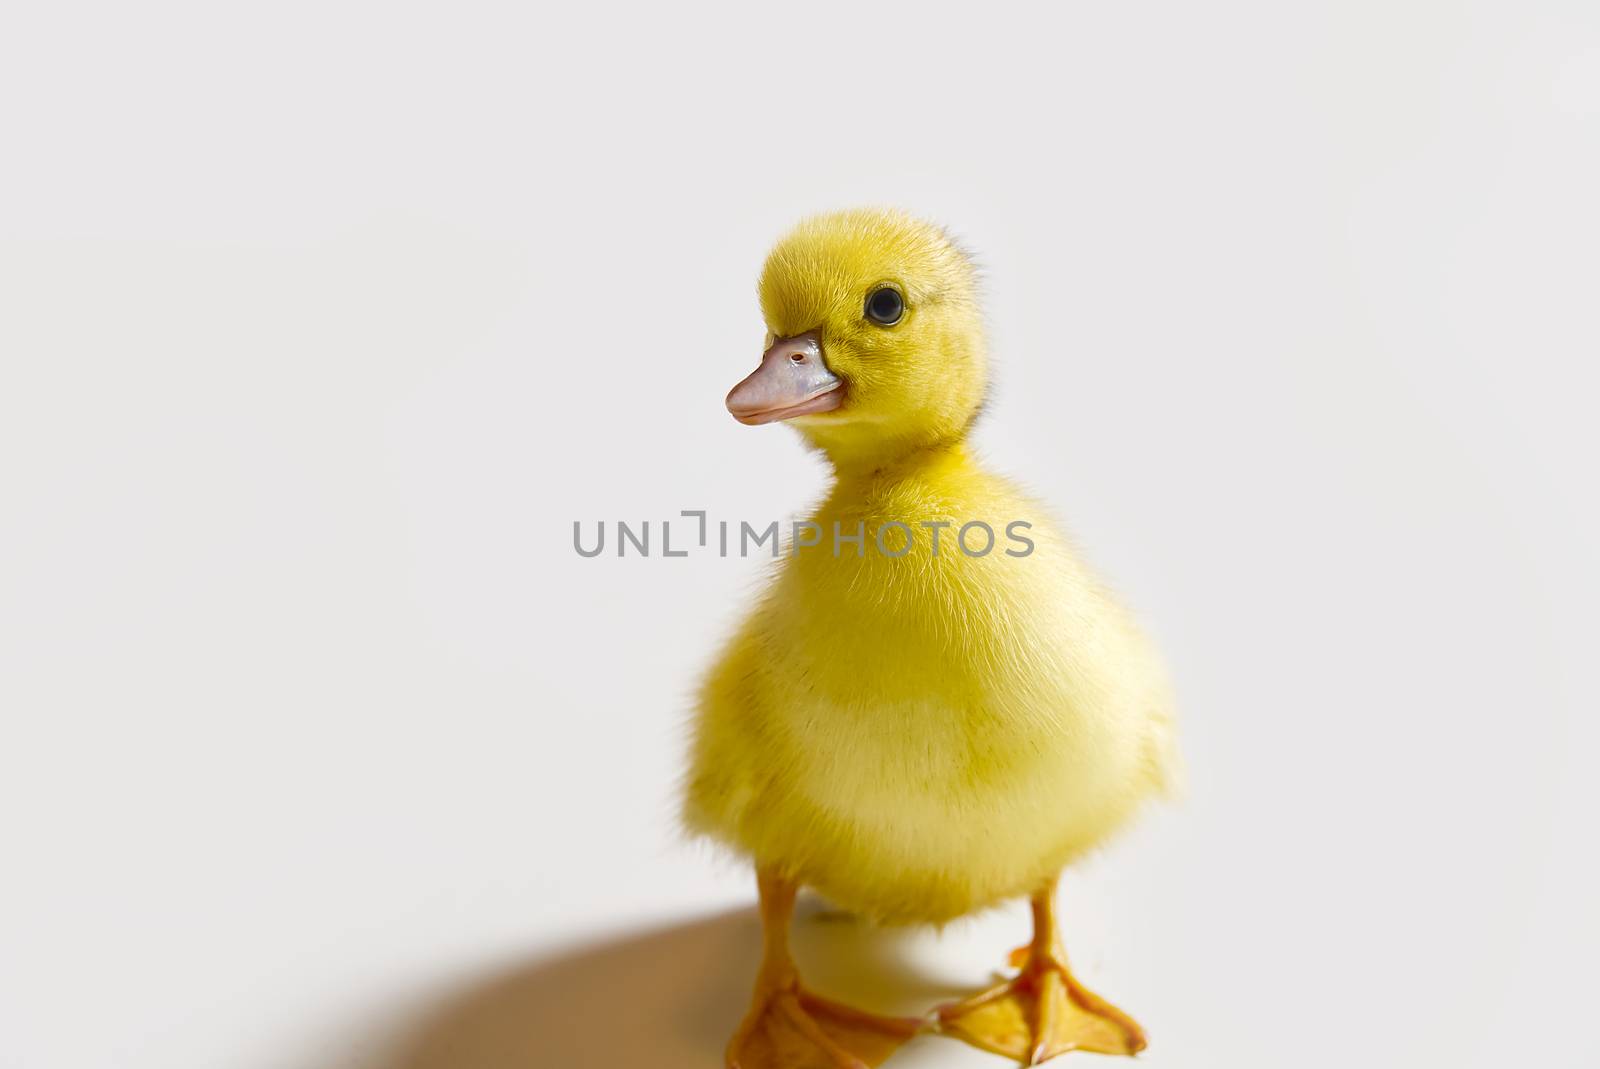 Few days old yellow duckling isolated close-up